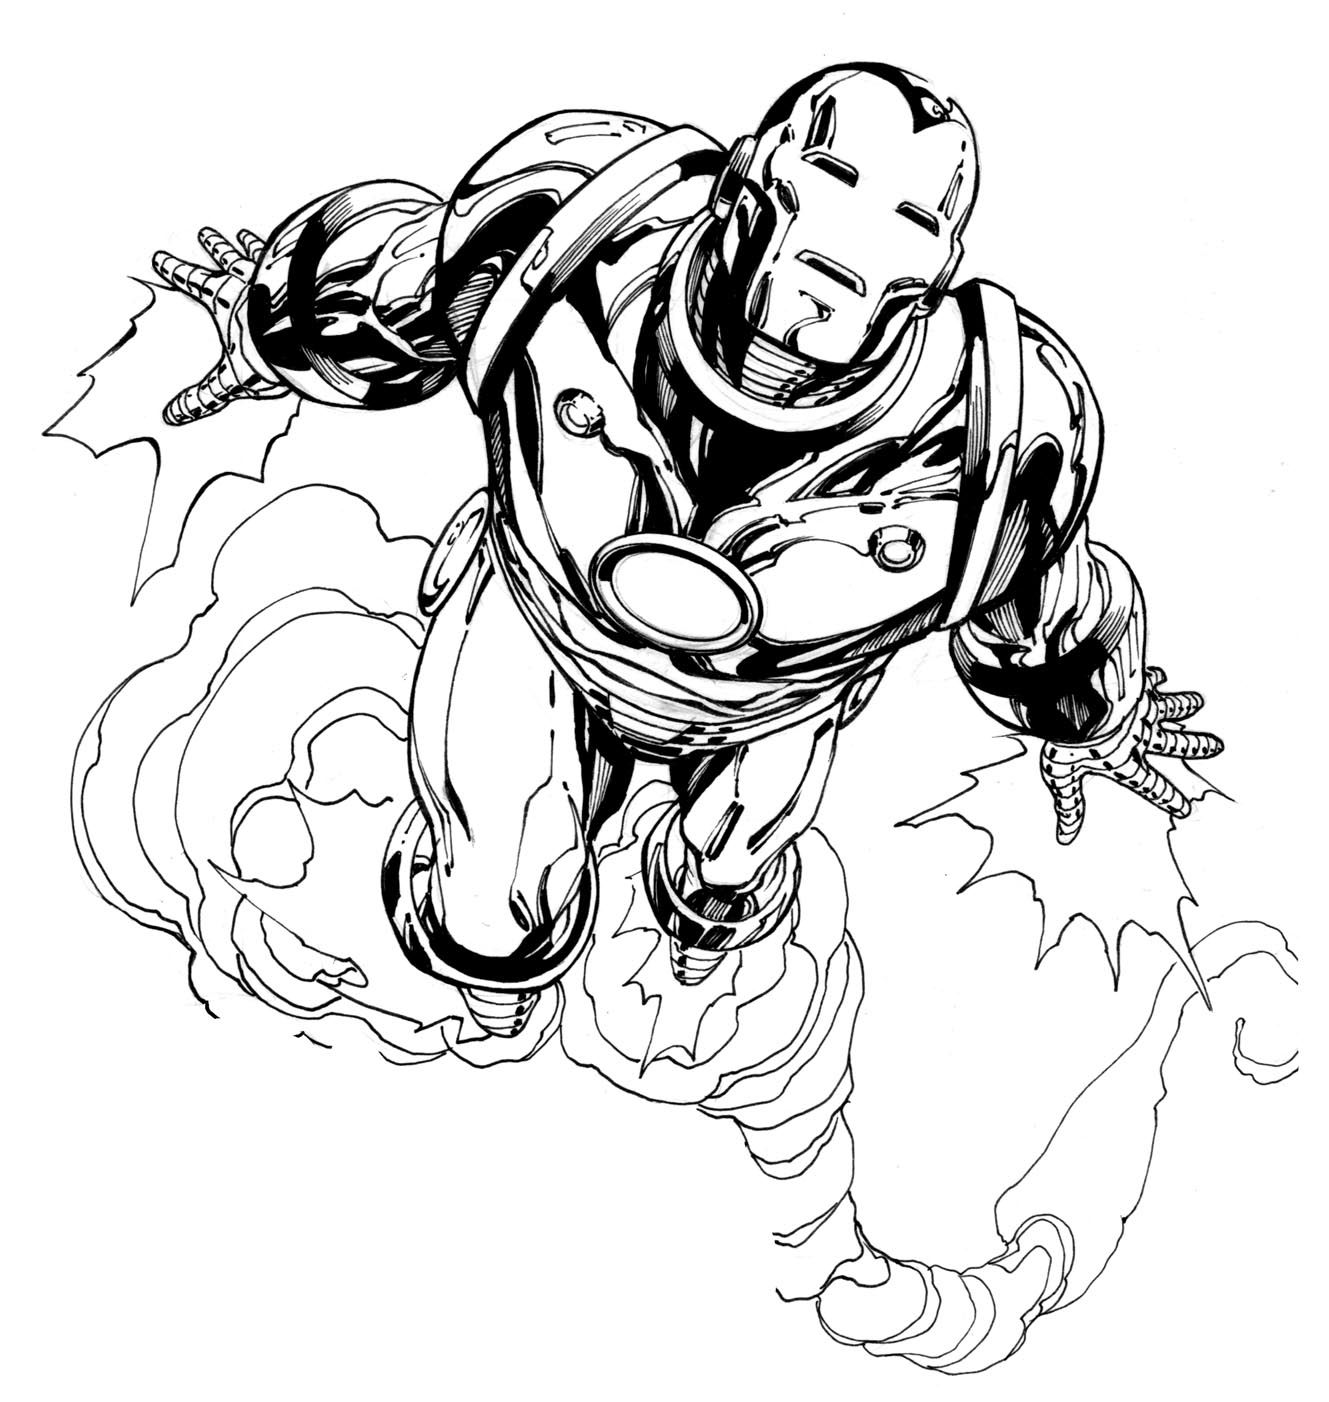 906 Simple Iron Man Coloring Book Pages with Printable